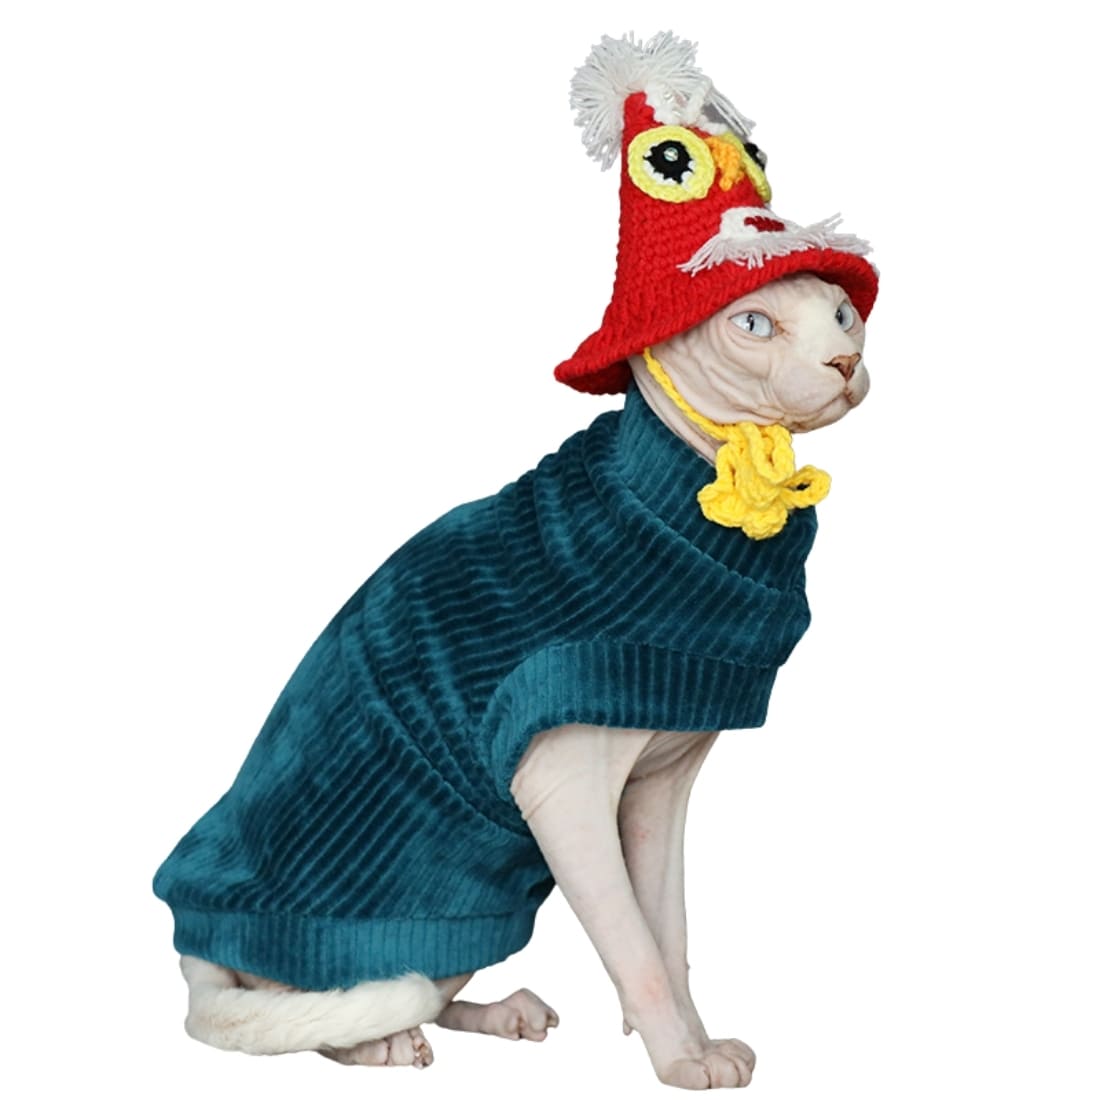 Halloween Outfits For Cats | A "Must-have" Halloween Costumes for cats